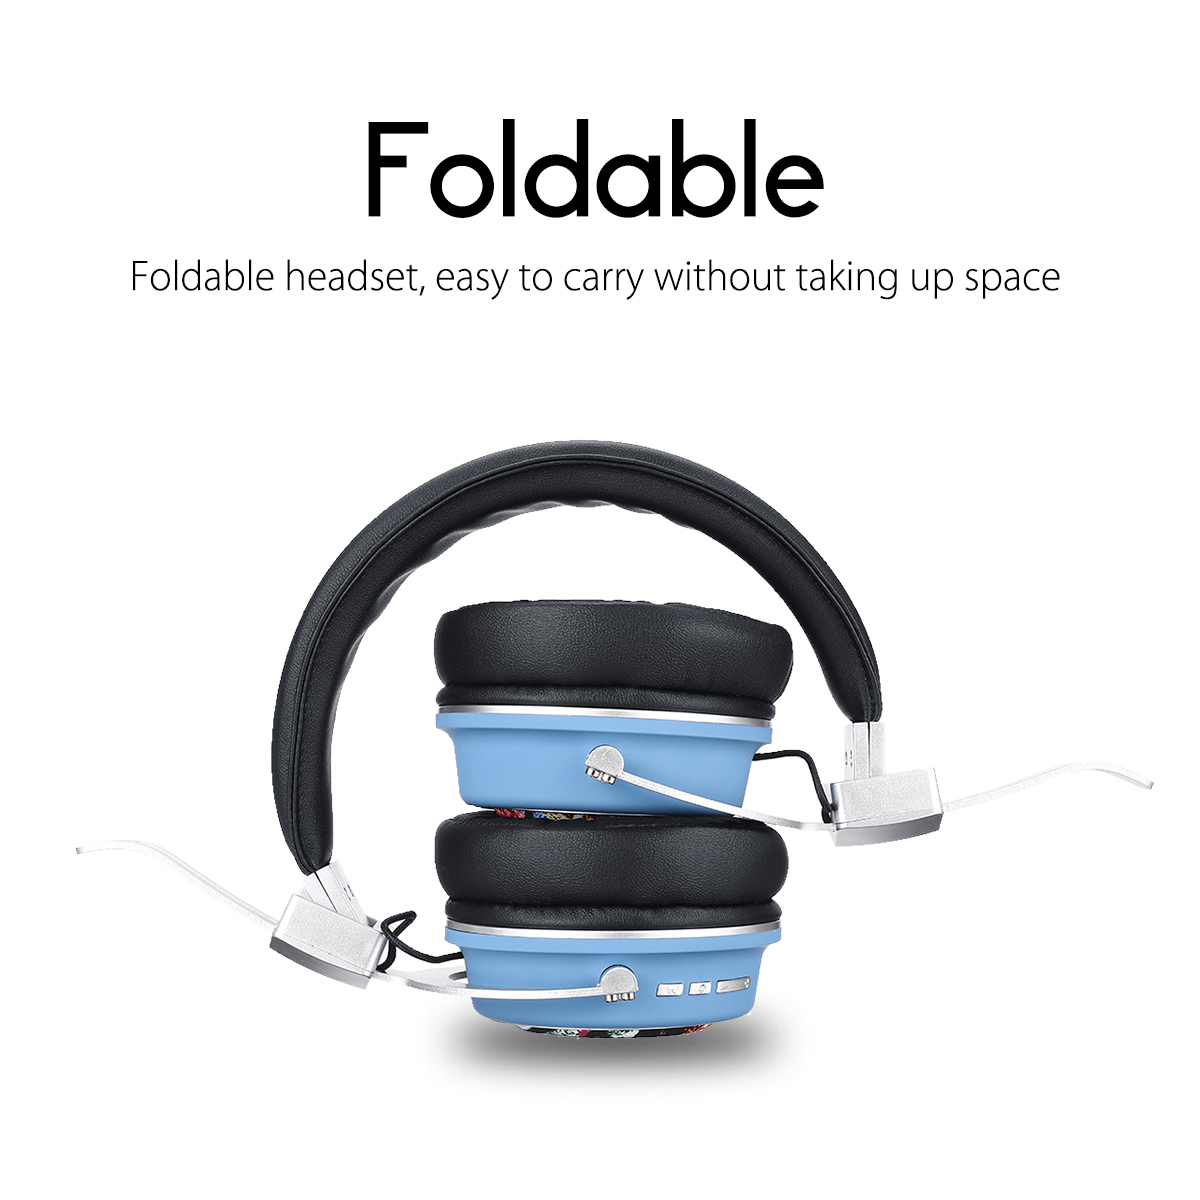 MH5-Wireless-bluetooth-50-Headphone-Foldable-Pattern-3D-Stereo-TF-Card-AUX-Headphone-with-Mic-1477112-8